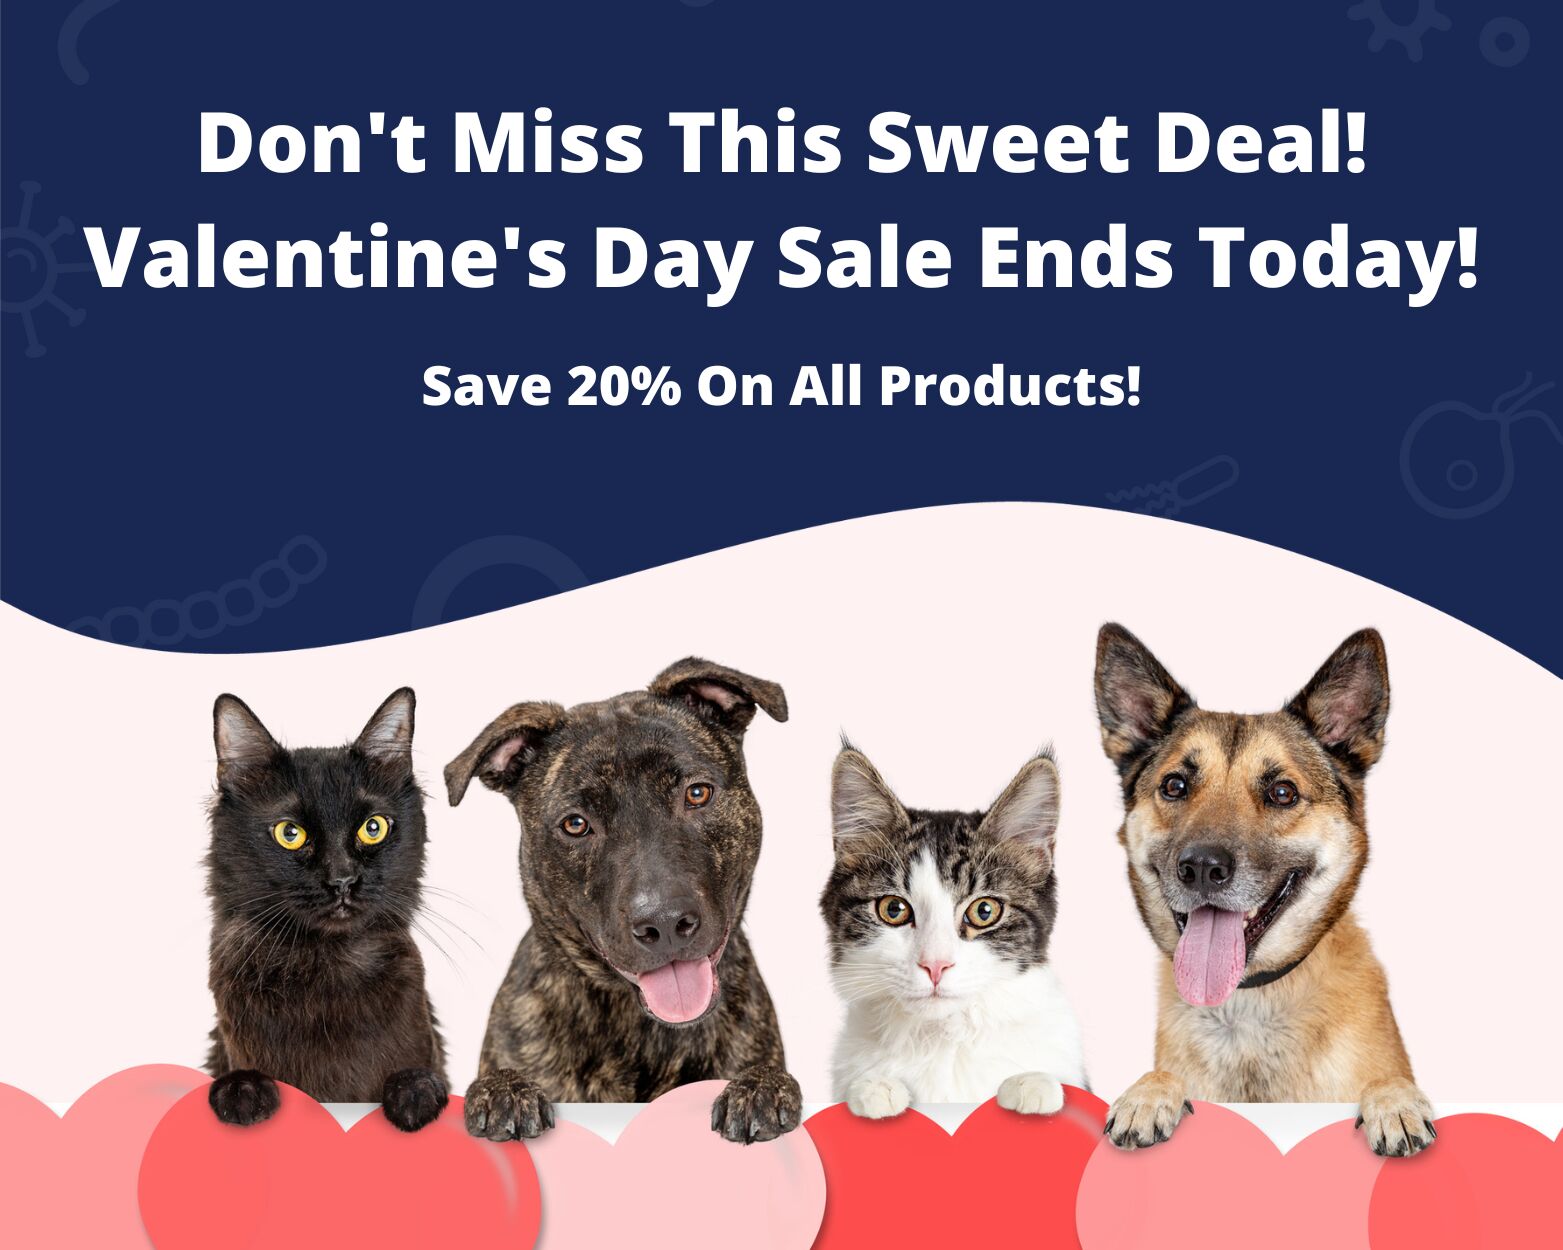 Give The Best To the One You Love: Save 20% On Carts of Two Items or More!